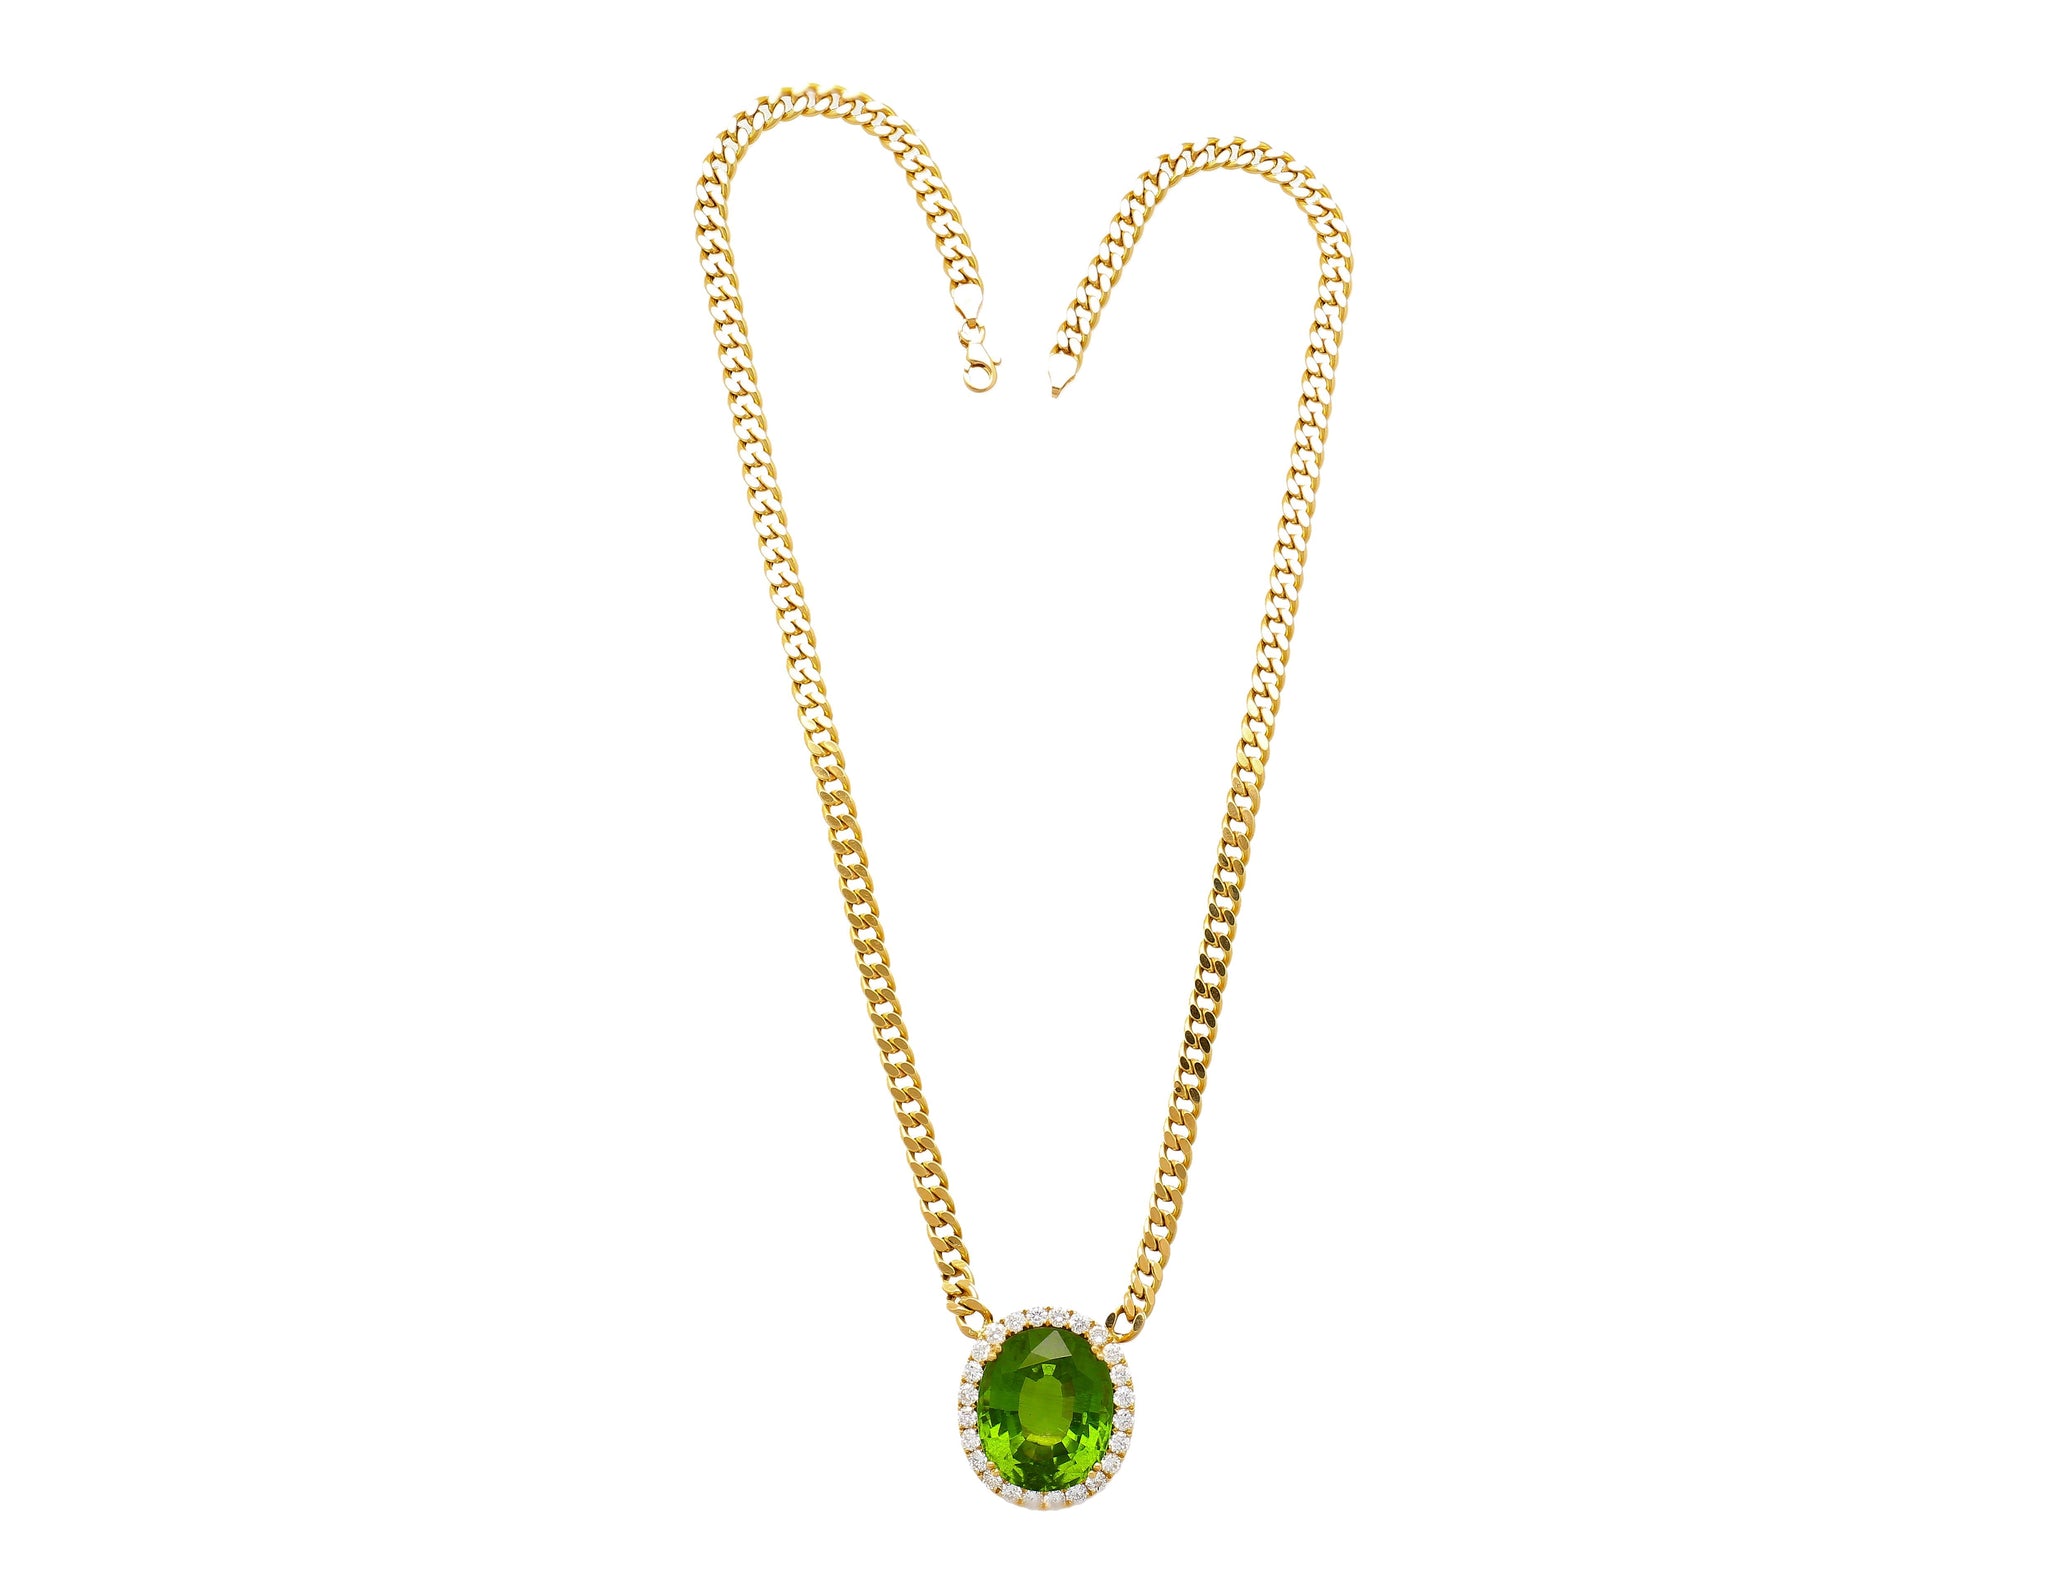 GRS Certified 51 carat Green Oval Cut Peridot with Diamond Halo in 18K Gold Cuban Chain Setting Pendant Necklace